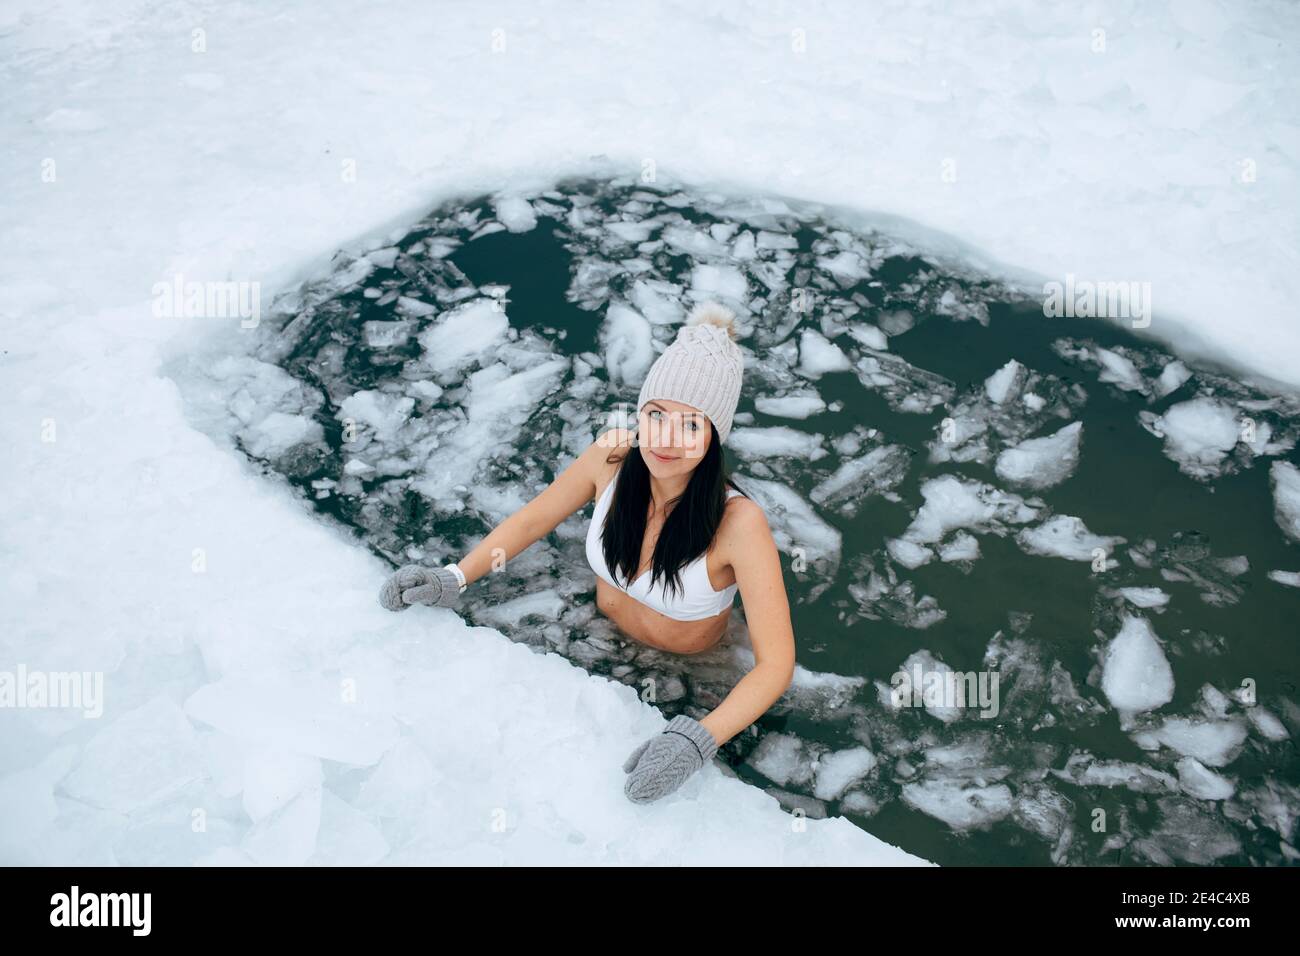 Winter swimming. Woman in frozen lake ice hole. Swimmers wellness in icy water. How to swim in cold water. Beautiful young female in zen meditation. Stock Photo